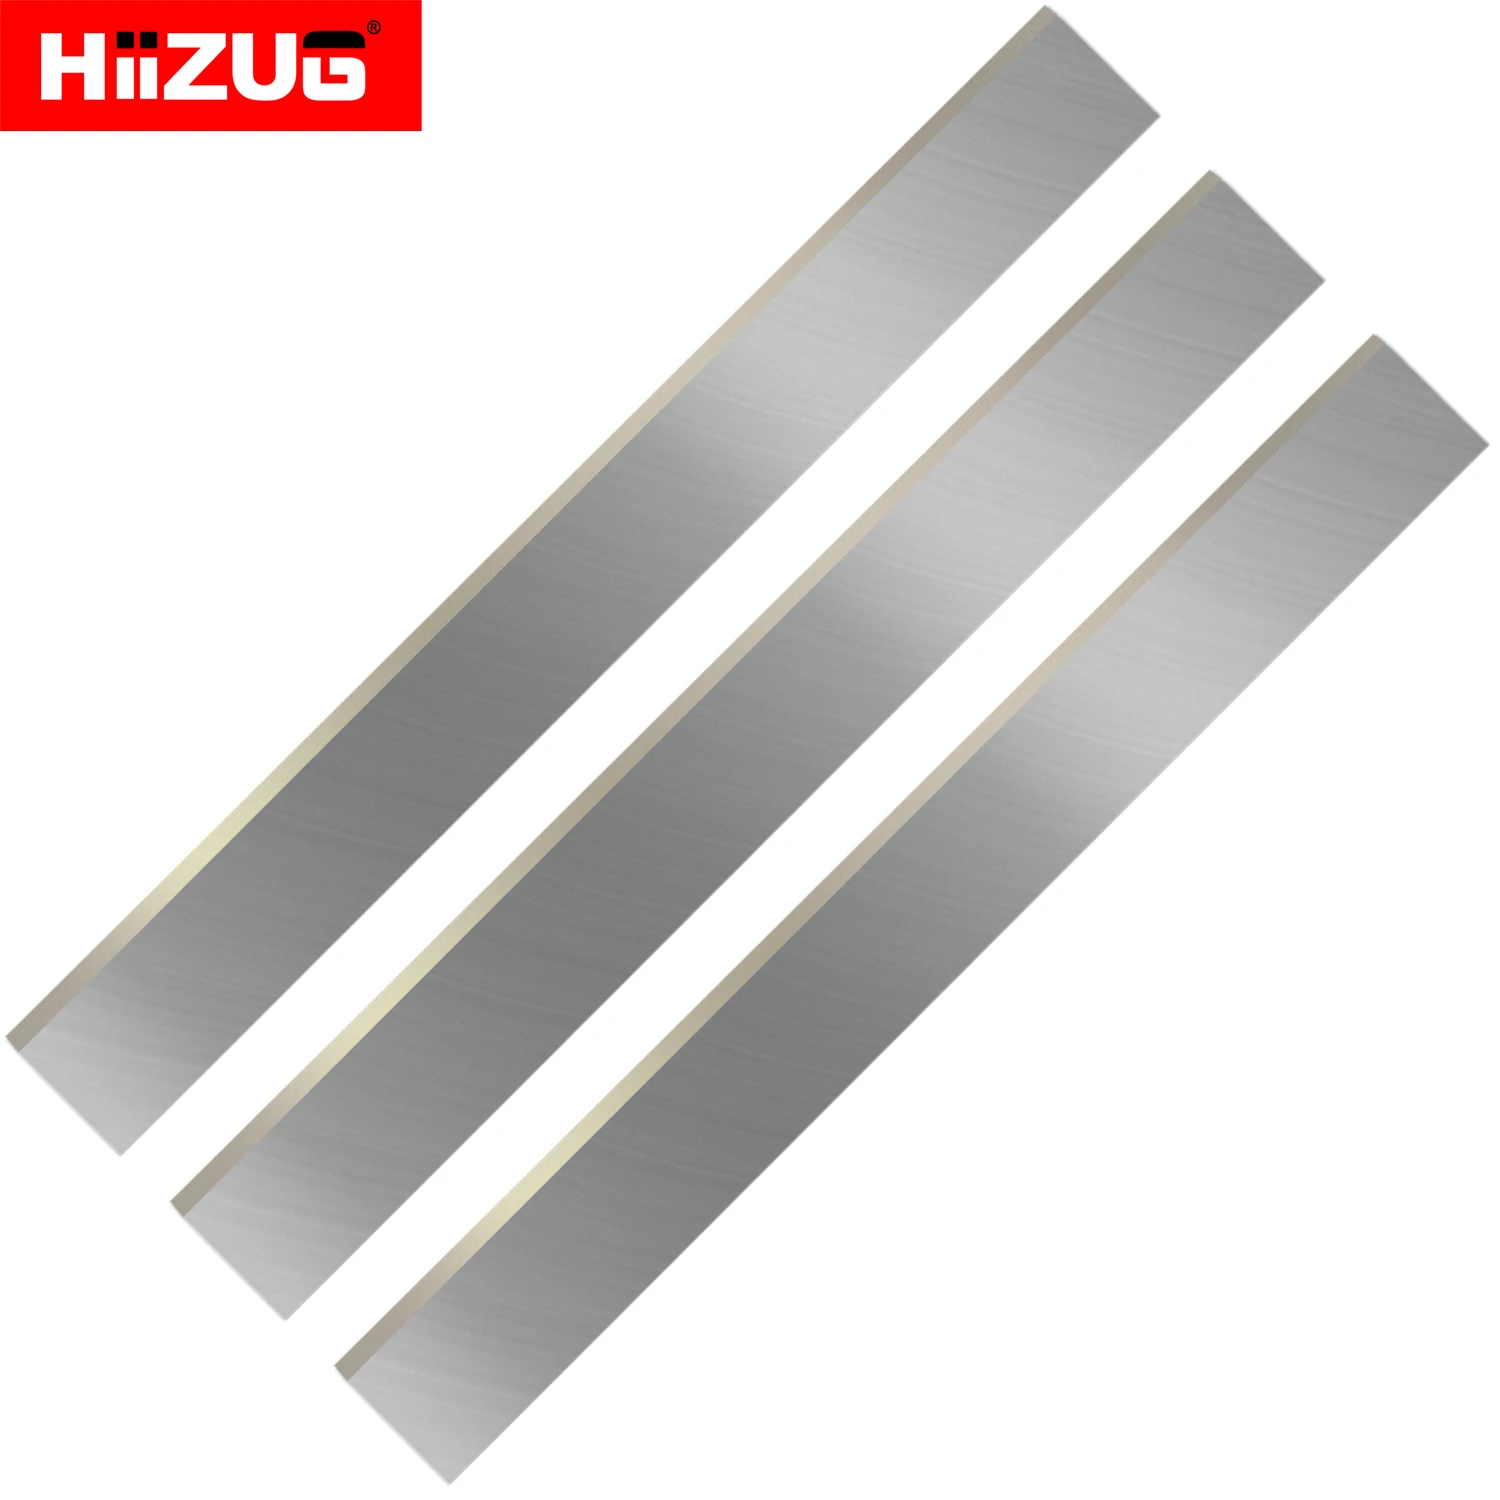 12 Inch 305mm Planer Jointers Blades Knives Resharpenable for Electric Planer HSS TCT Set of 3